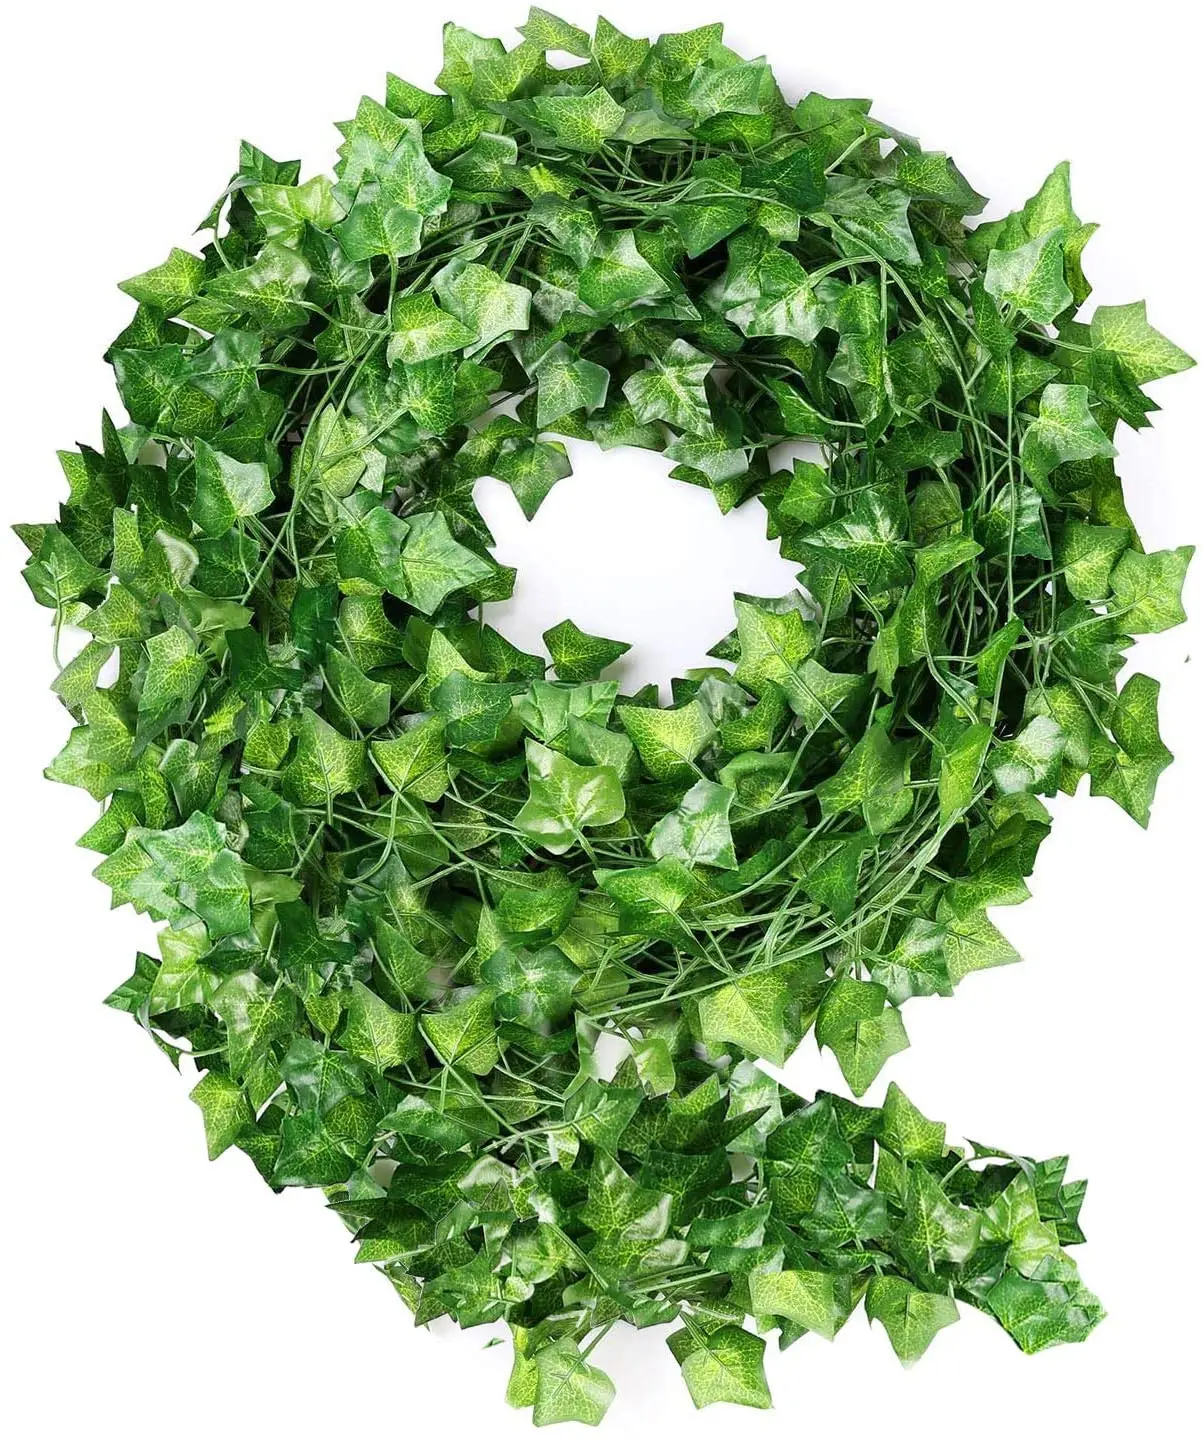 

INUNION 12 Pack 84 Ft Artificial Ivy Garland Ivy Vines Hanging Plant for Wedding Garland Arti Foliage Flowers Home Garden